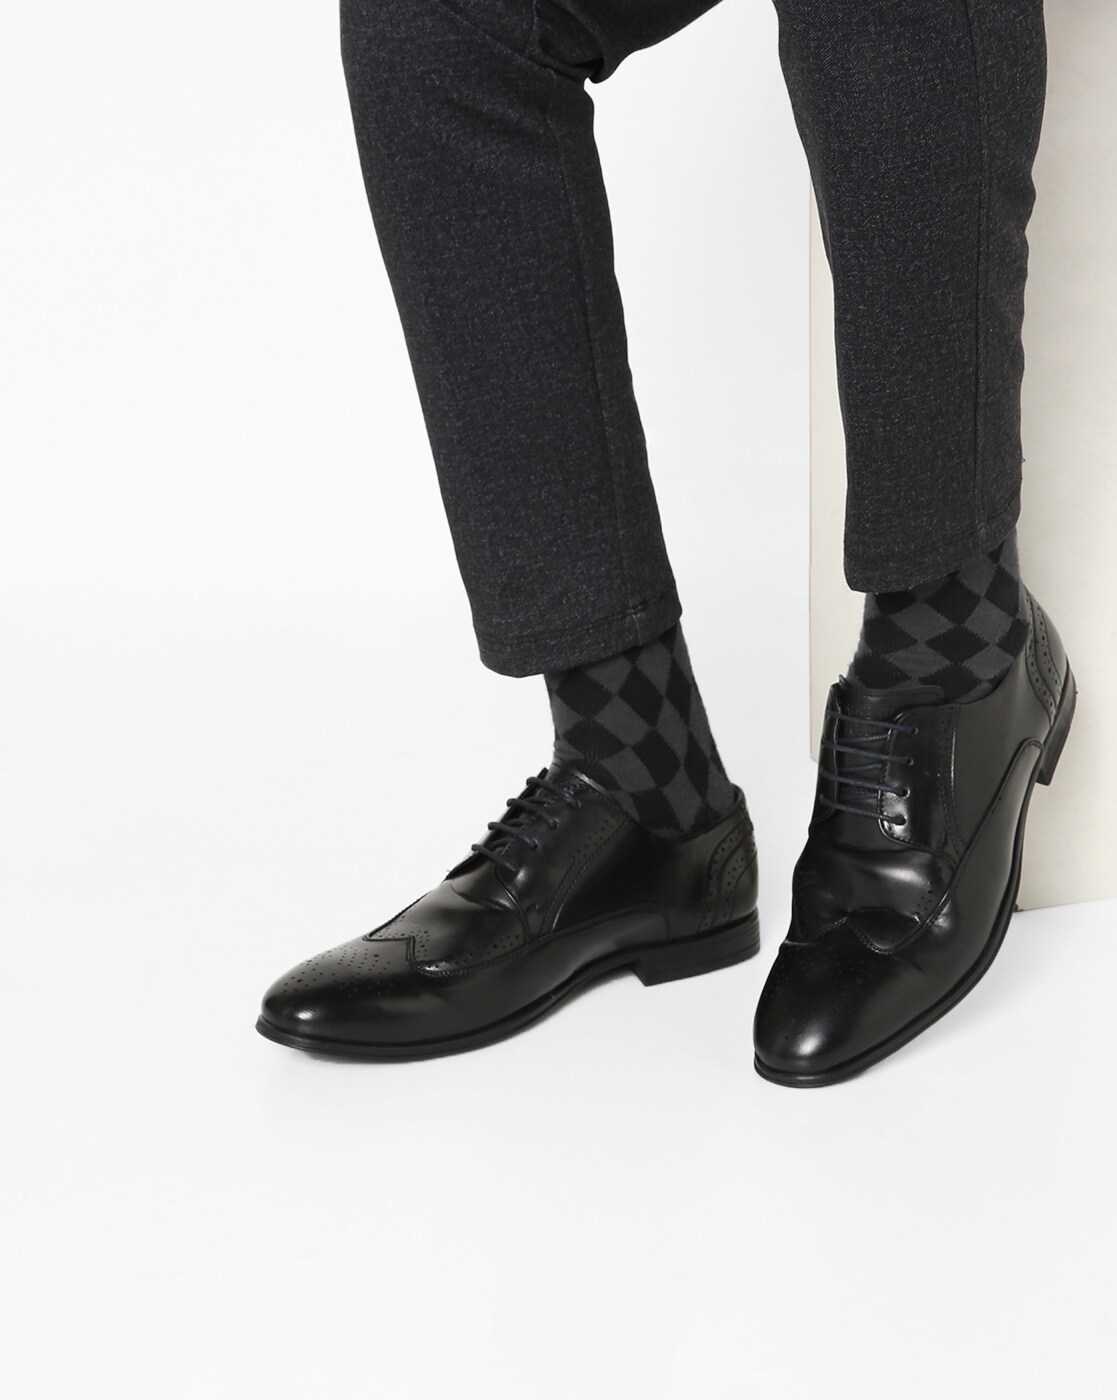 glossy black shoes